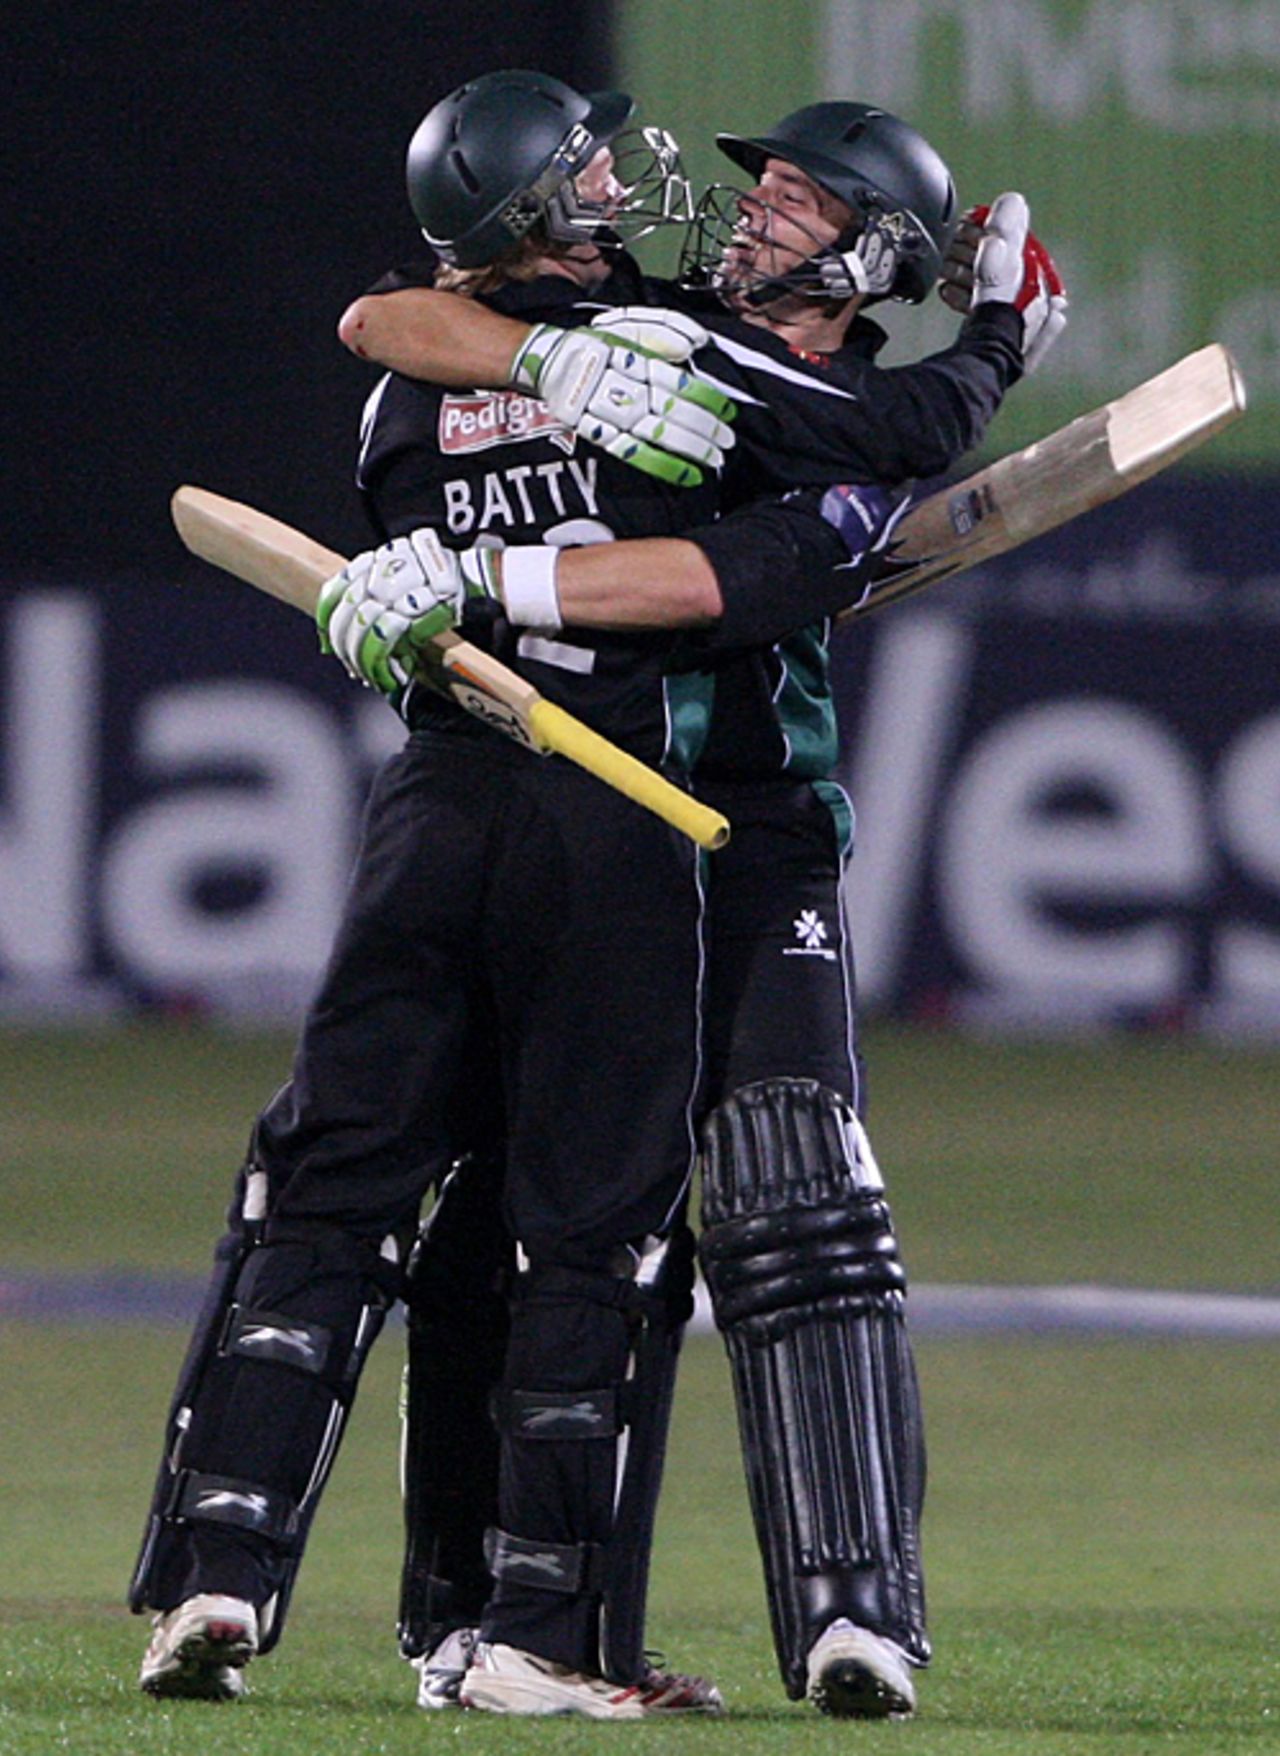 Gareth Batty and Stephen Moore embrace after taking Worcestershire to victory and so securing the Pro40 title, Gloucester v Worcestershire, Pro40 Division One, Bristol, September 13, 2007